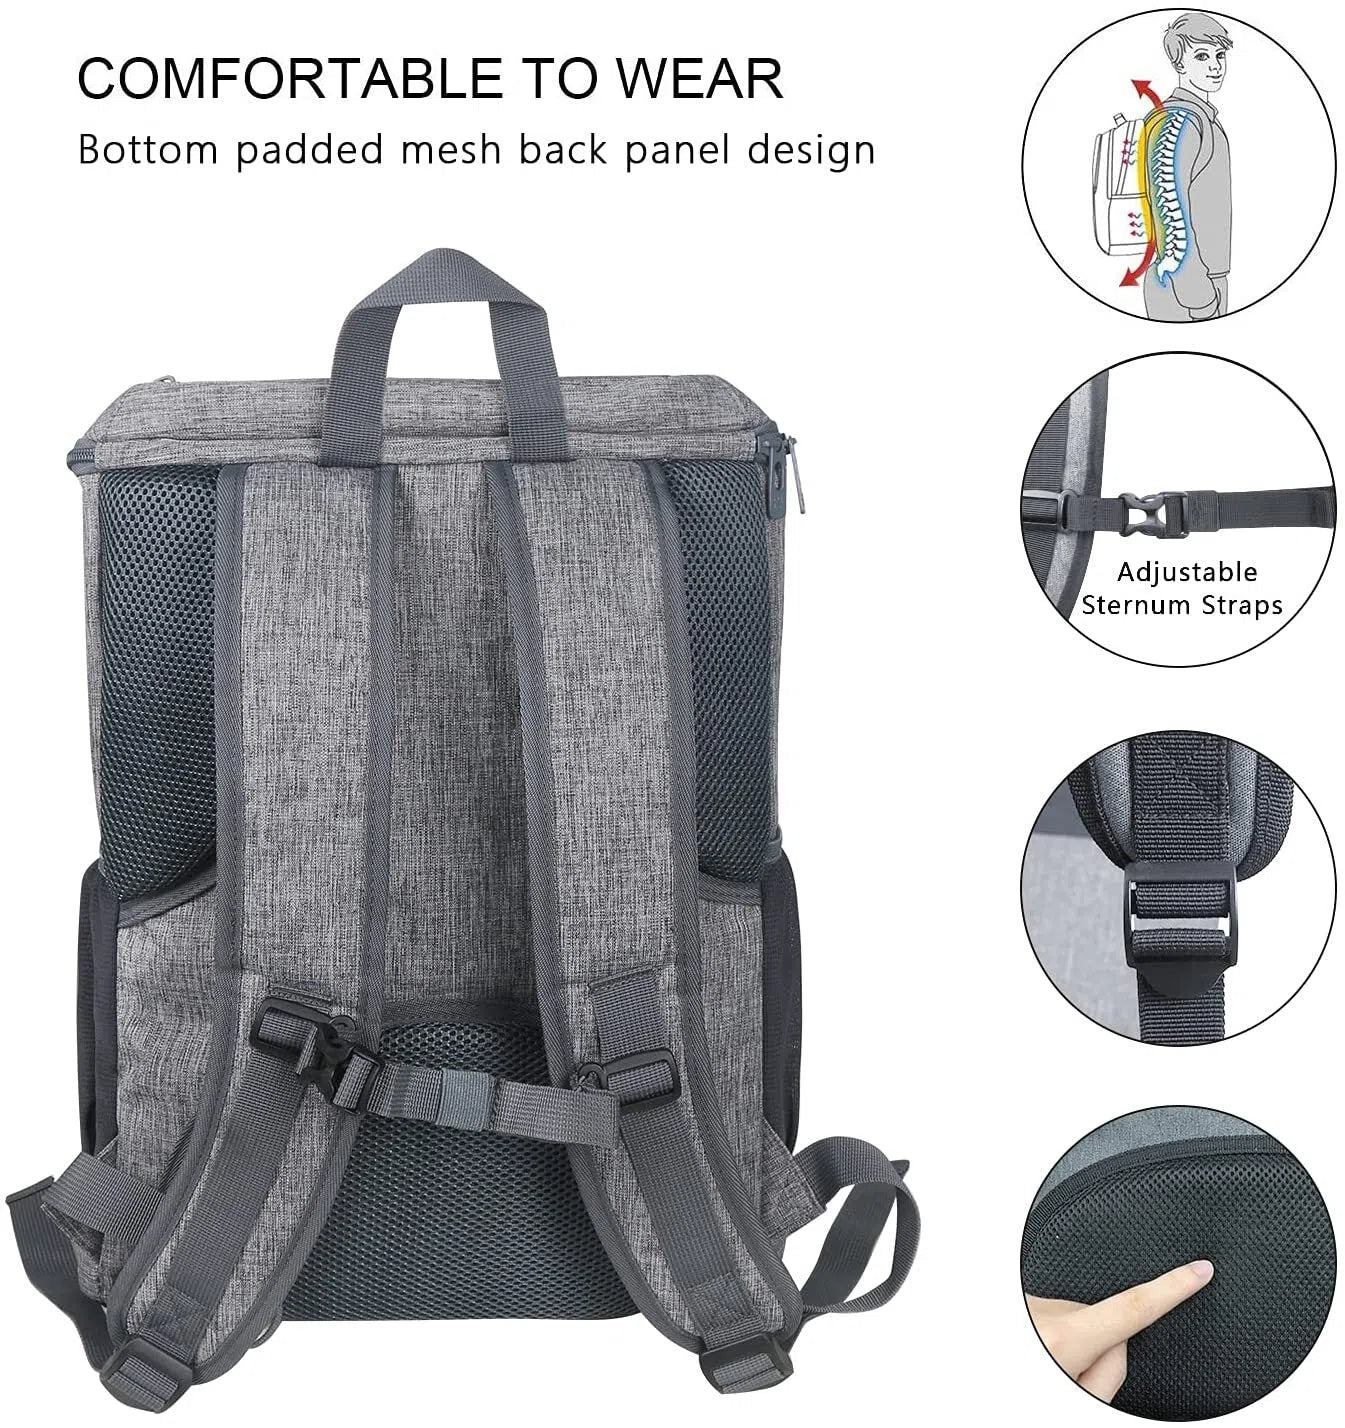 Hap Tim Backpack Cooler Insulated Waterproof Picnic Backpack 30 Can Soft Sided Grey for Beach, Camping, Hiking, Lunch (1002-G)